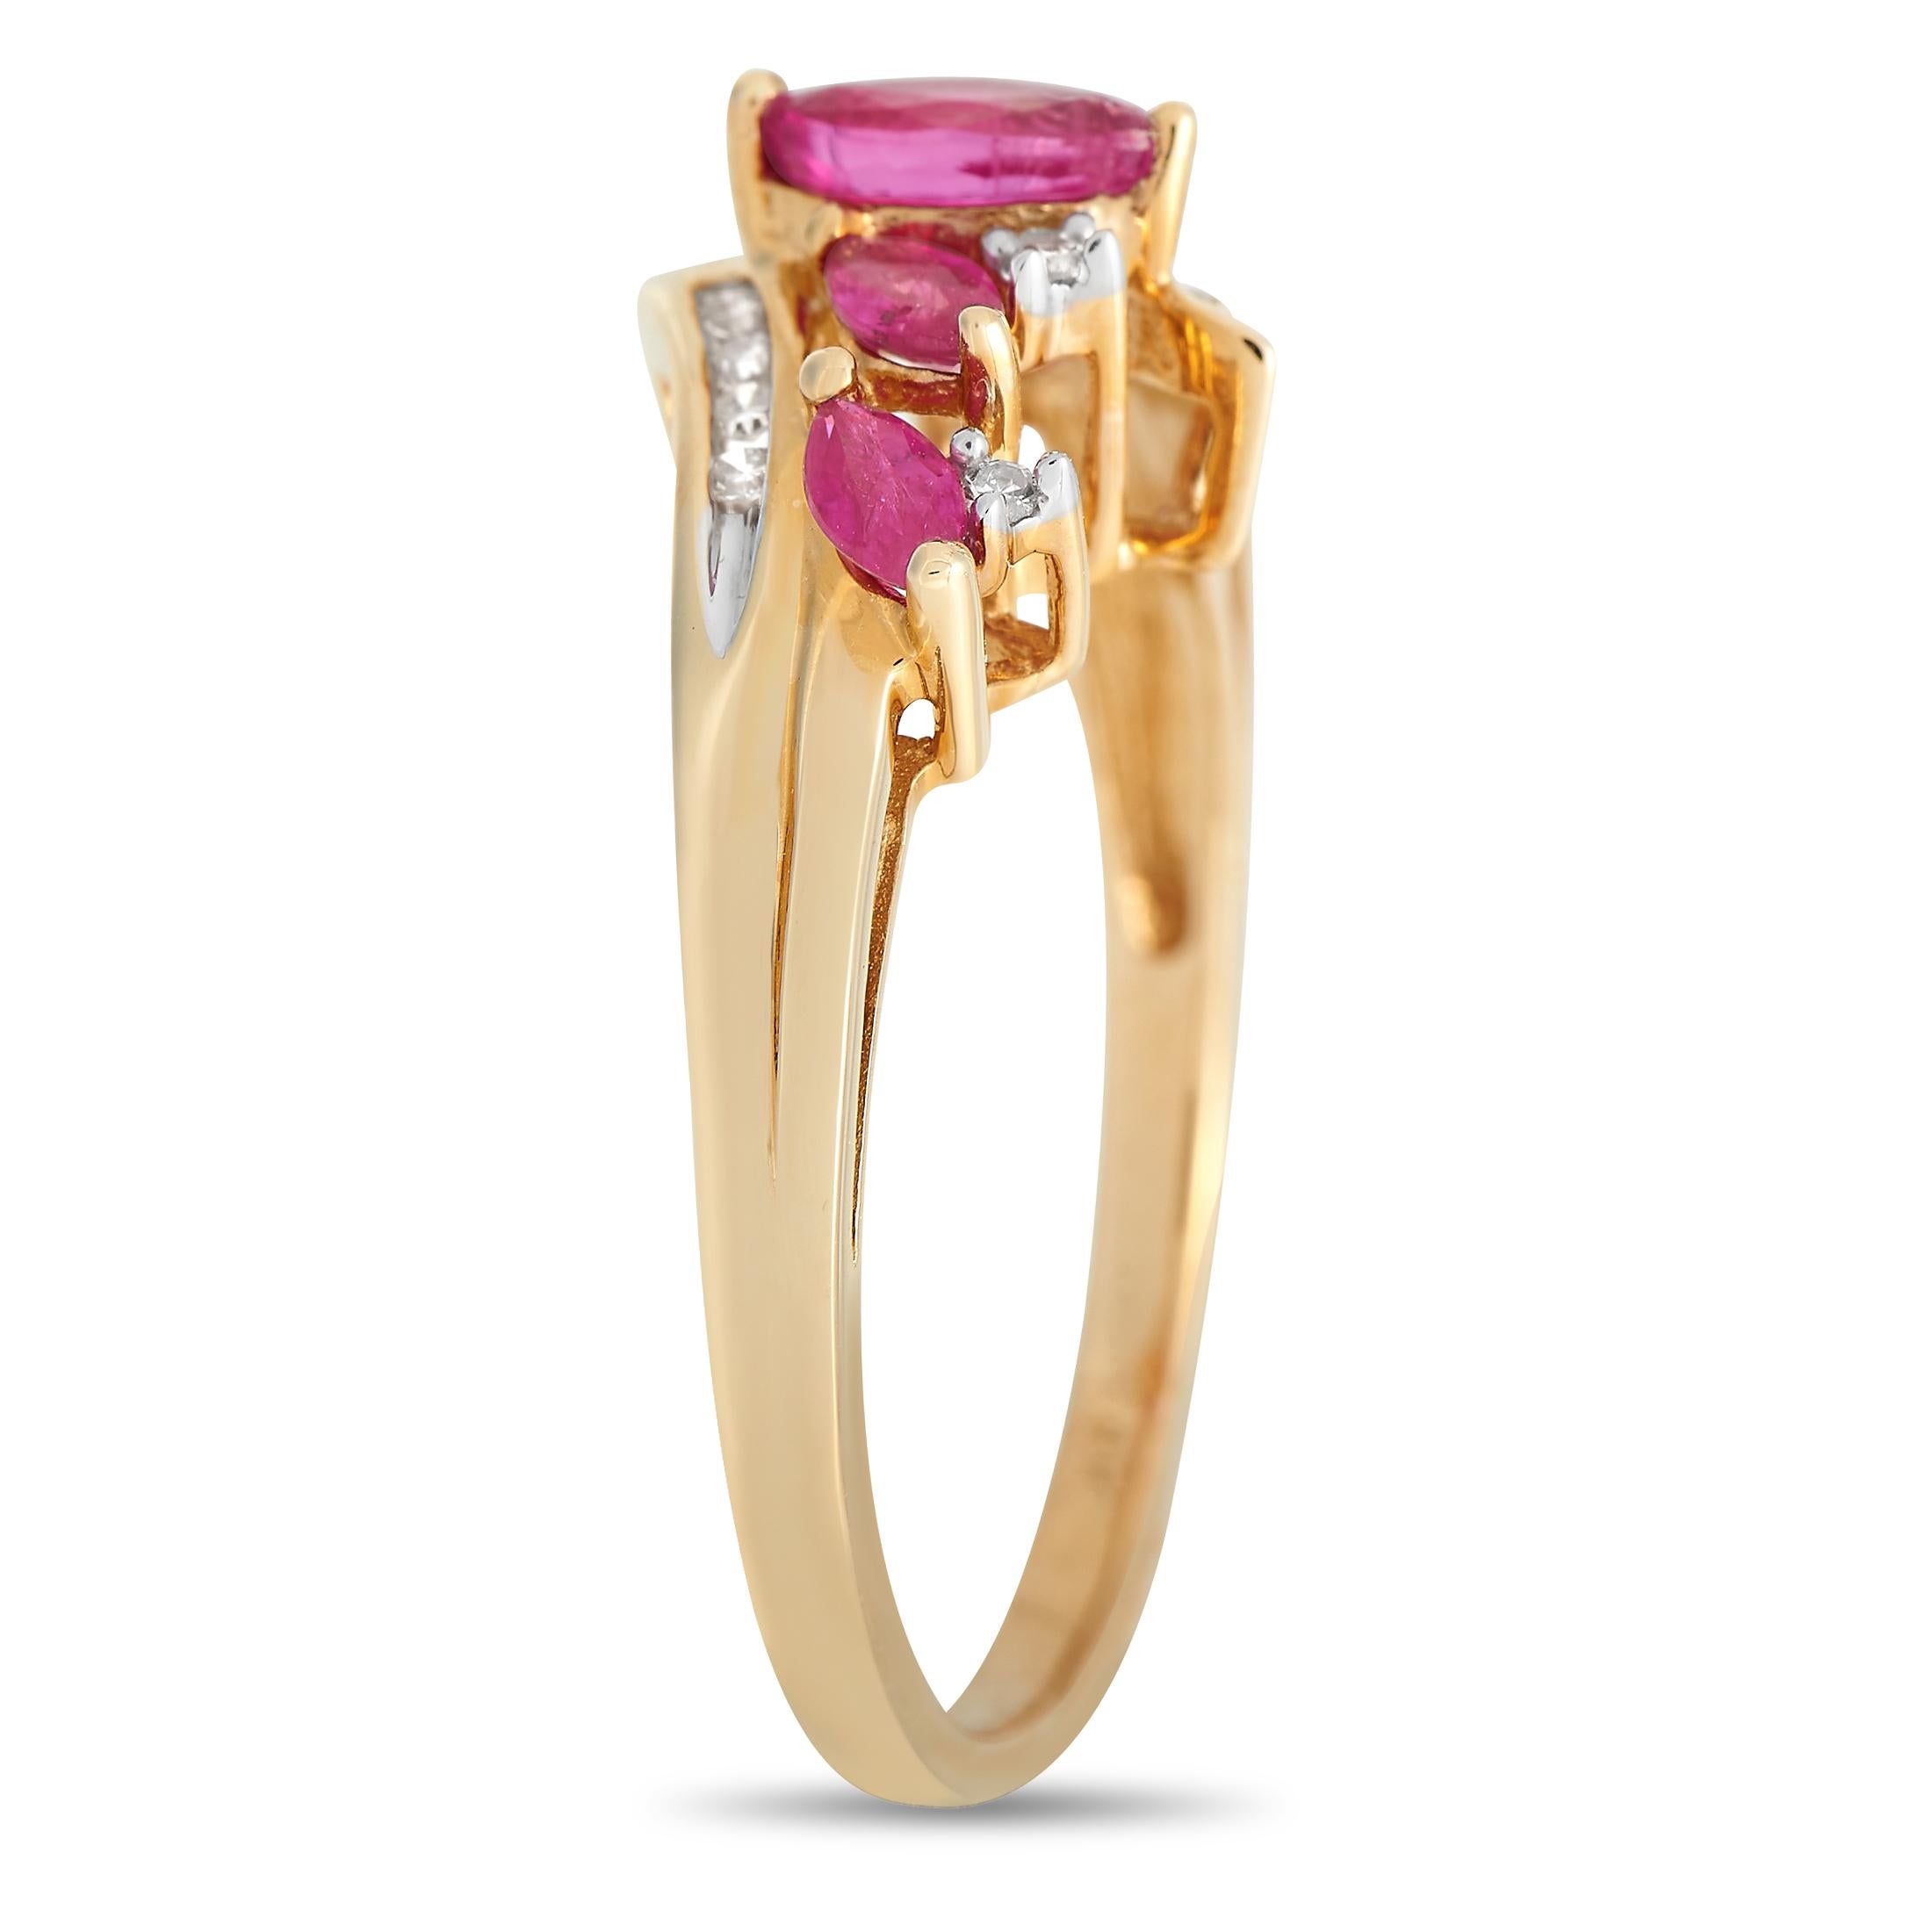 This radiant ring will continually make a statement. Crafted from 14K Yellow Gold, this pieces setting features a delicate 2mm wide band and a 6mm top height. A series of eye-catching Ruby gemstones come to life thanks to 0.09 carats of sparkling